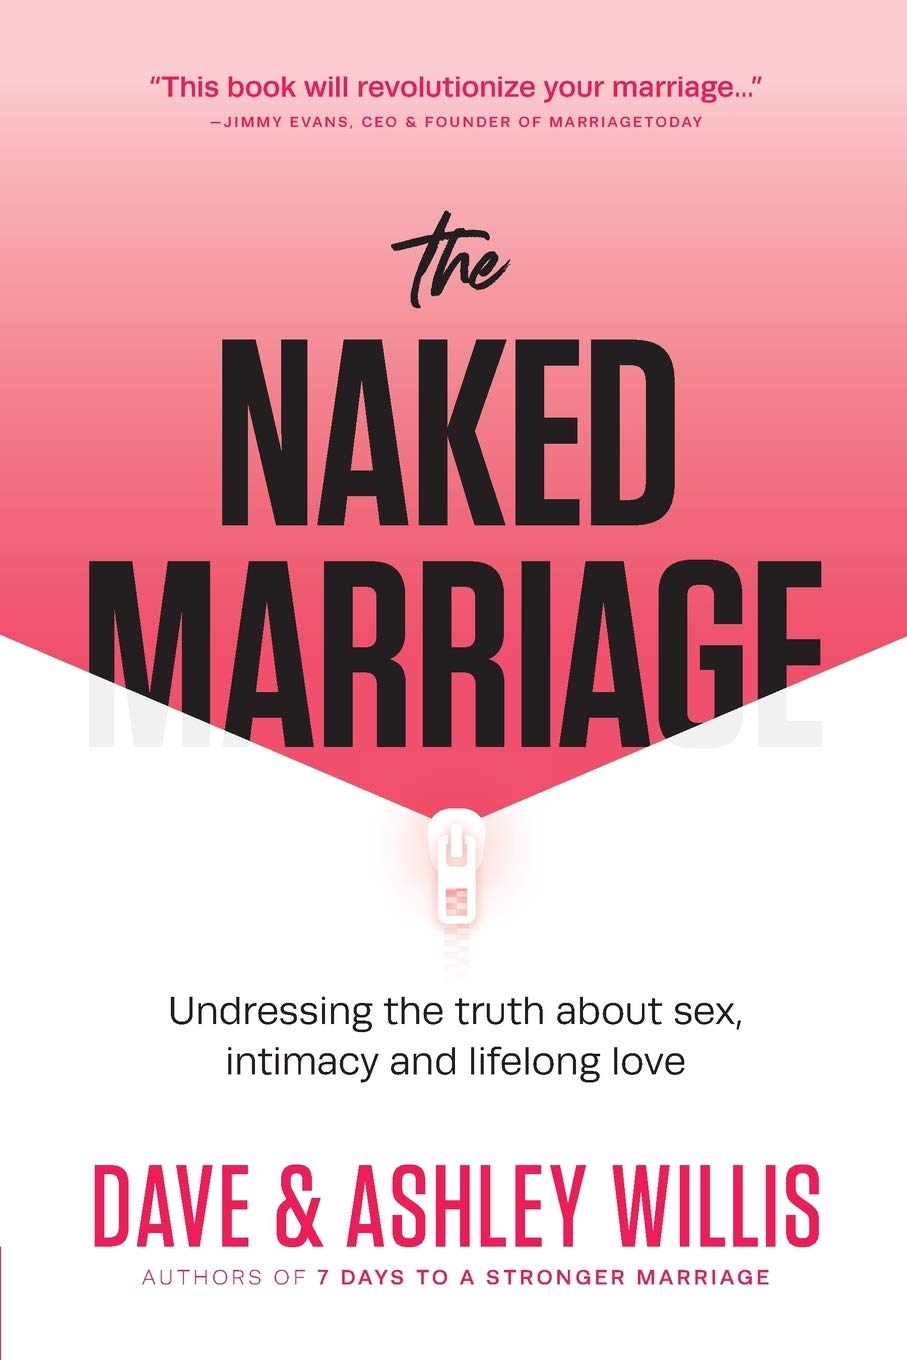 The Naked Marriage: Undressing the Truth About Sex, Intimacy, and Lifelong Love